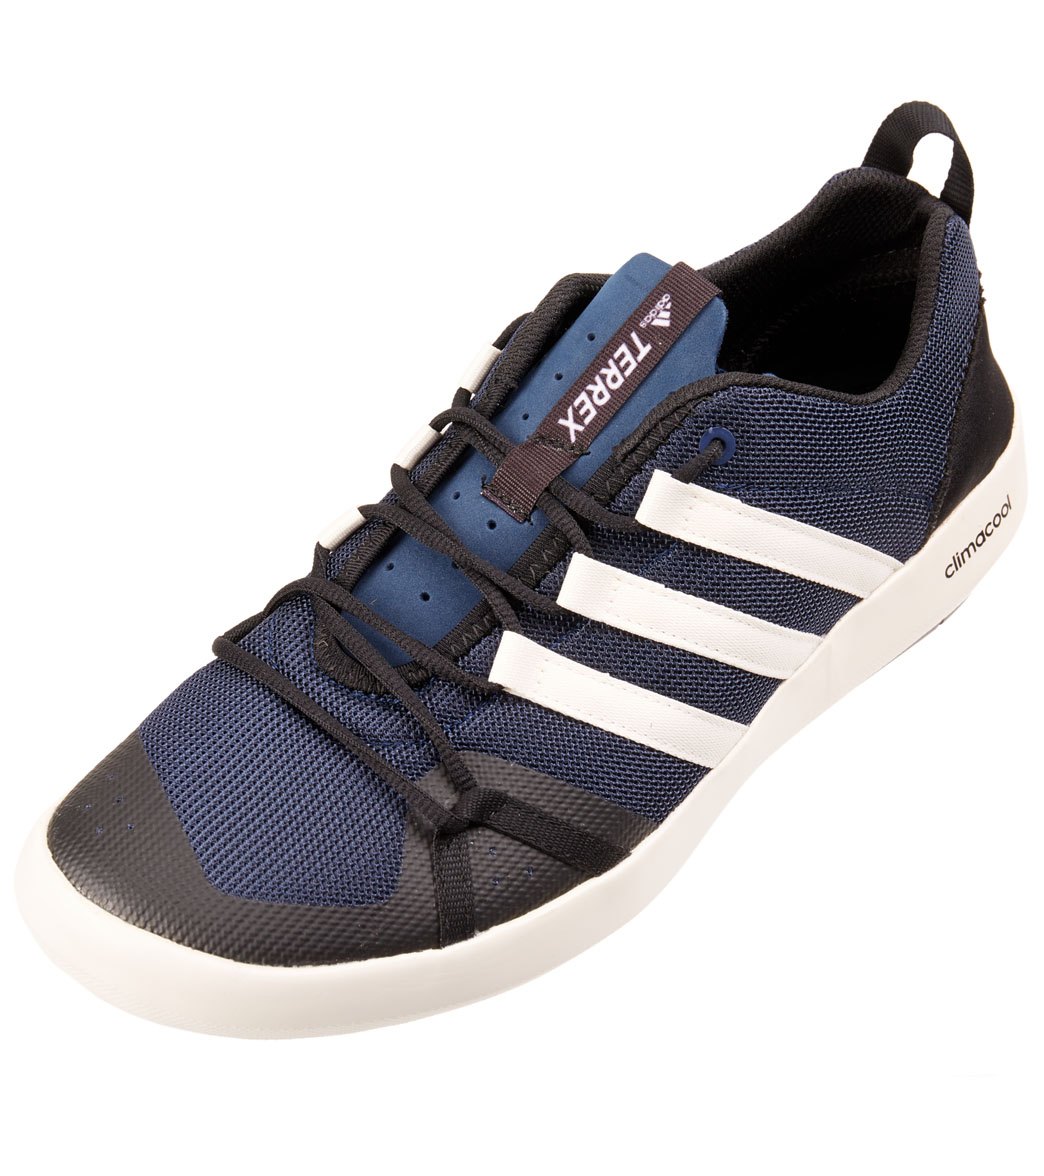 adidas outdoor terrex climacool boat men's water shoes - 53% remise -  www.muminlerotomotiv.com.tr